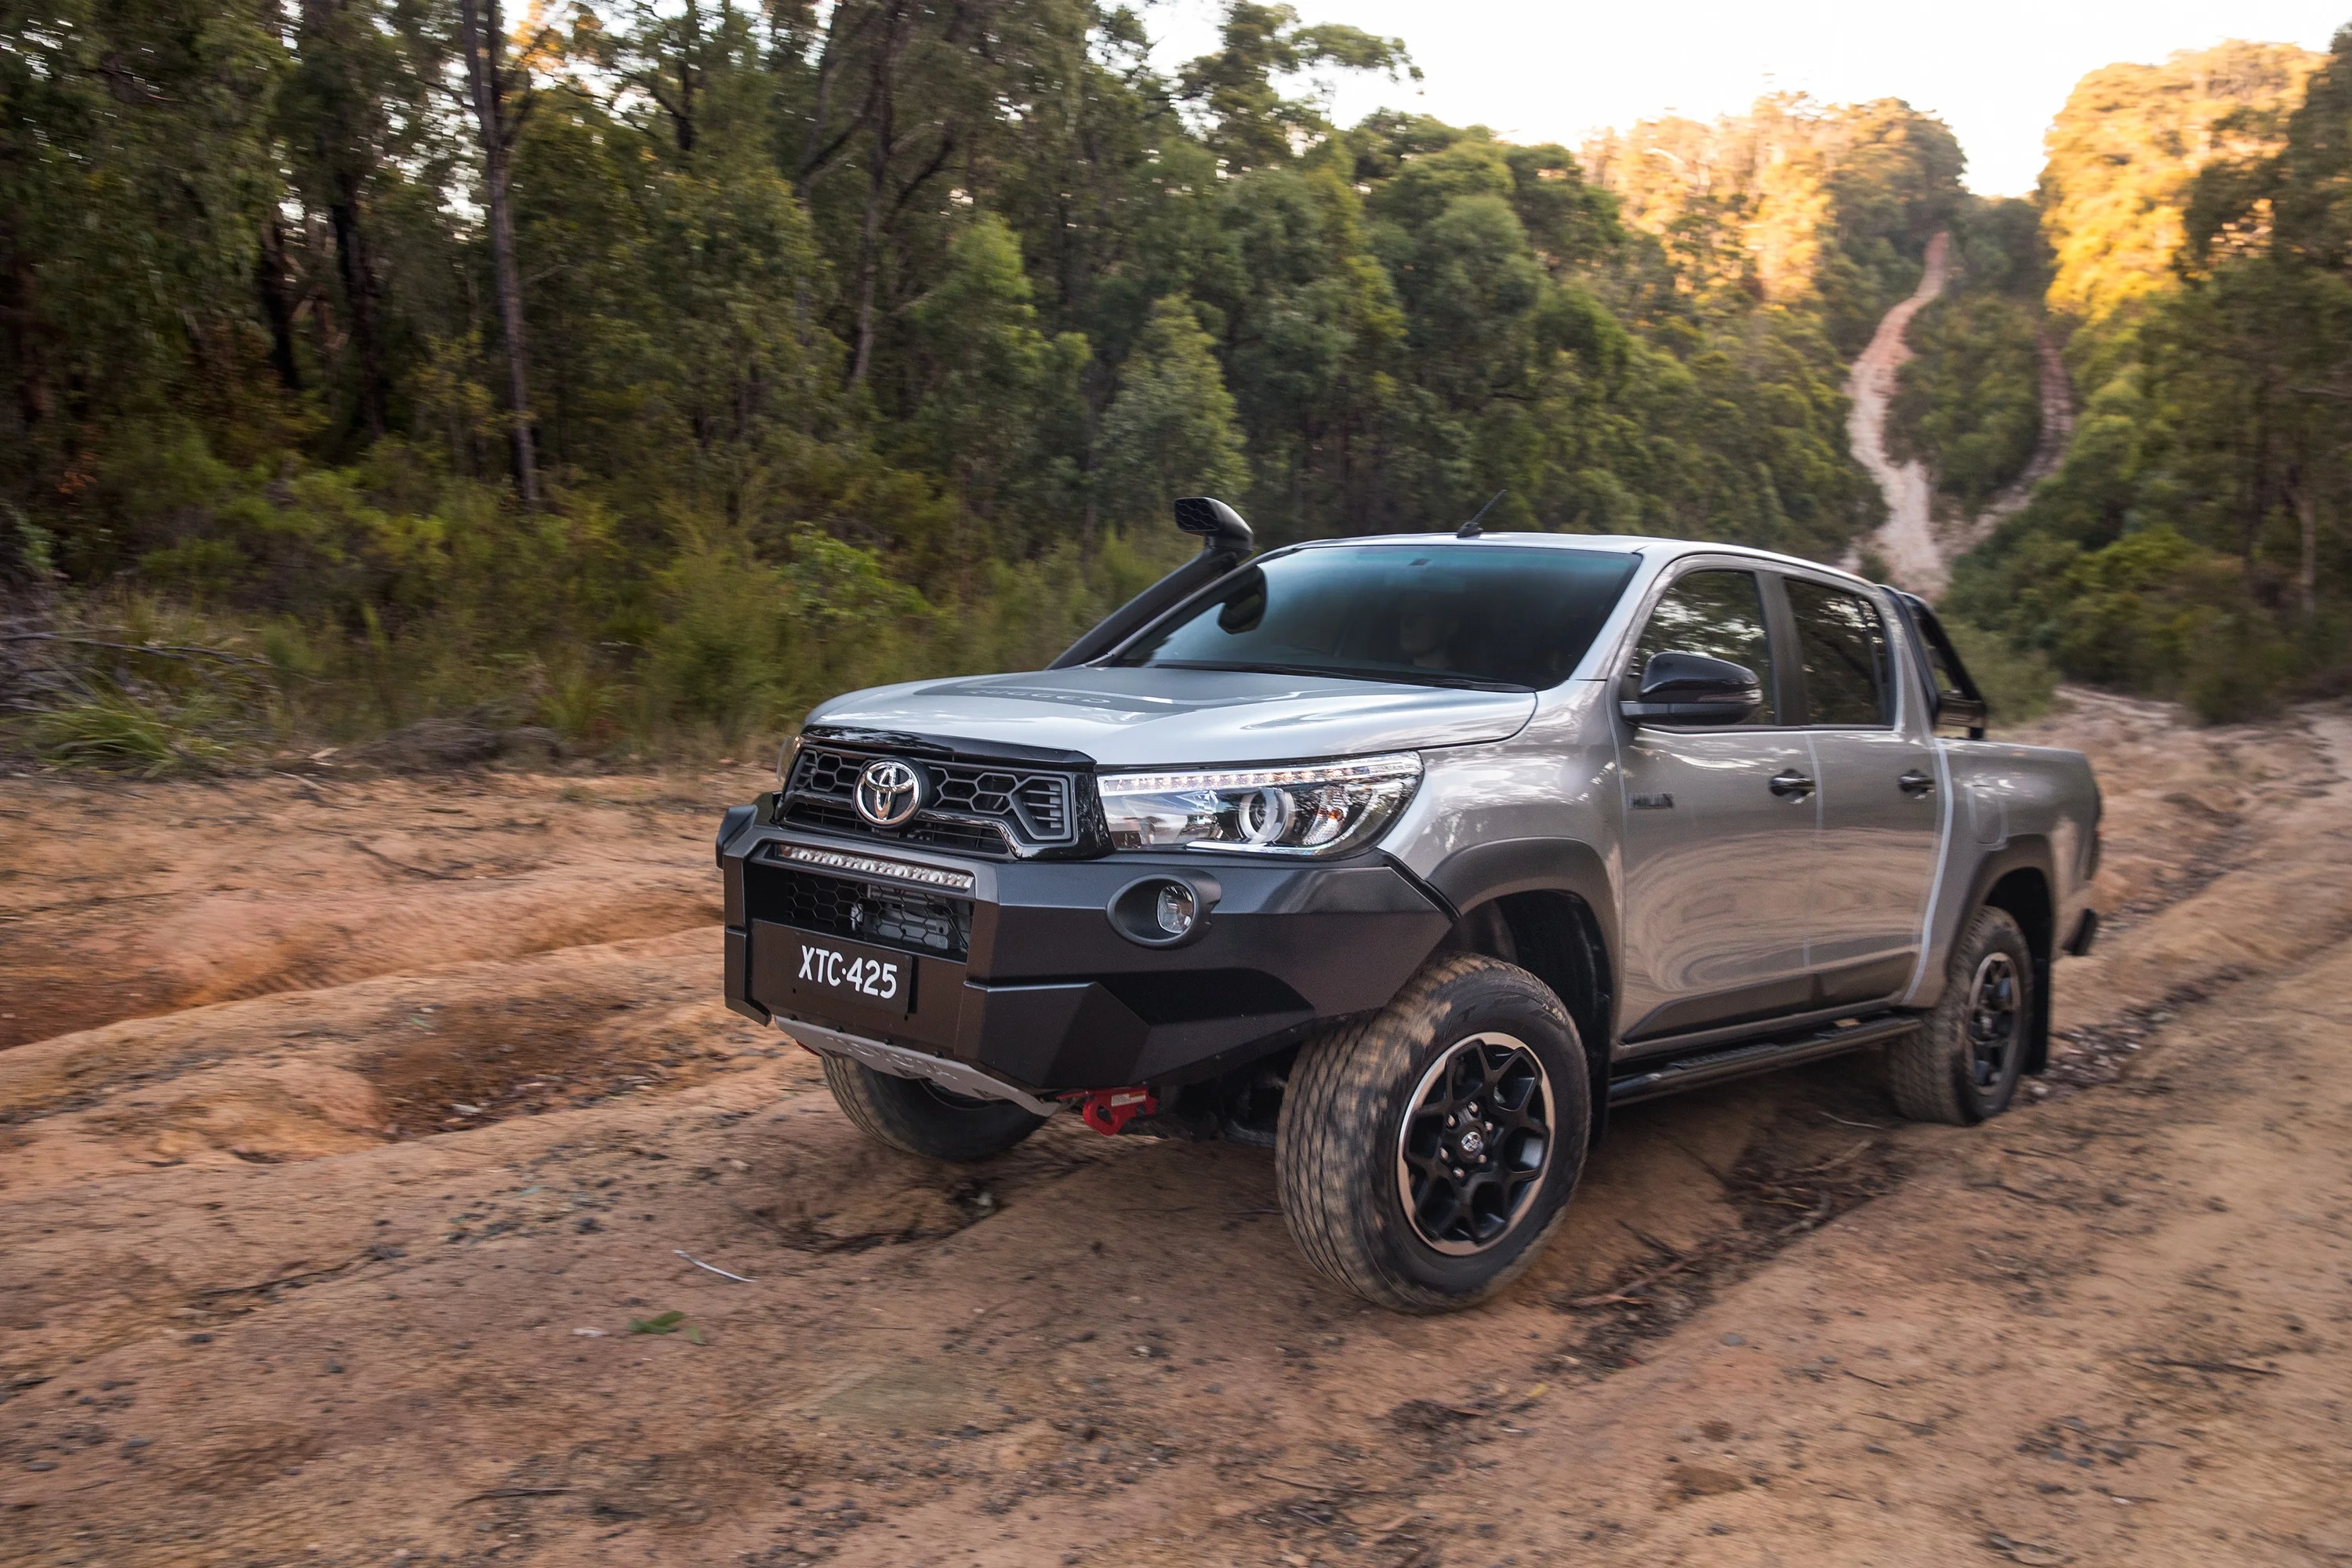 2019 Toyota Tacoma vs. 2019 Toyota Hilux: What's the Difference